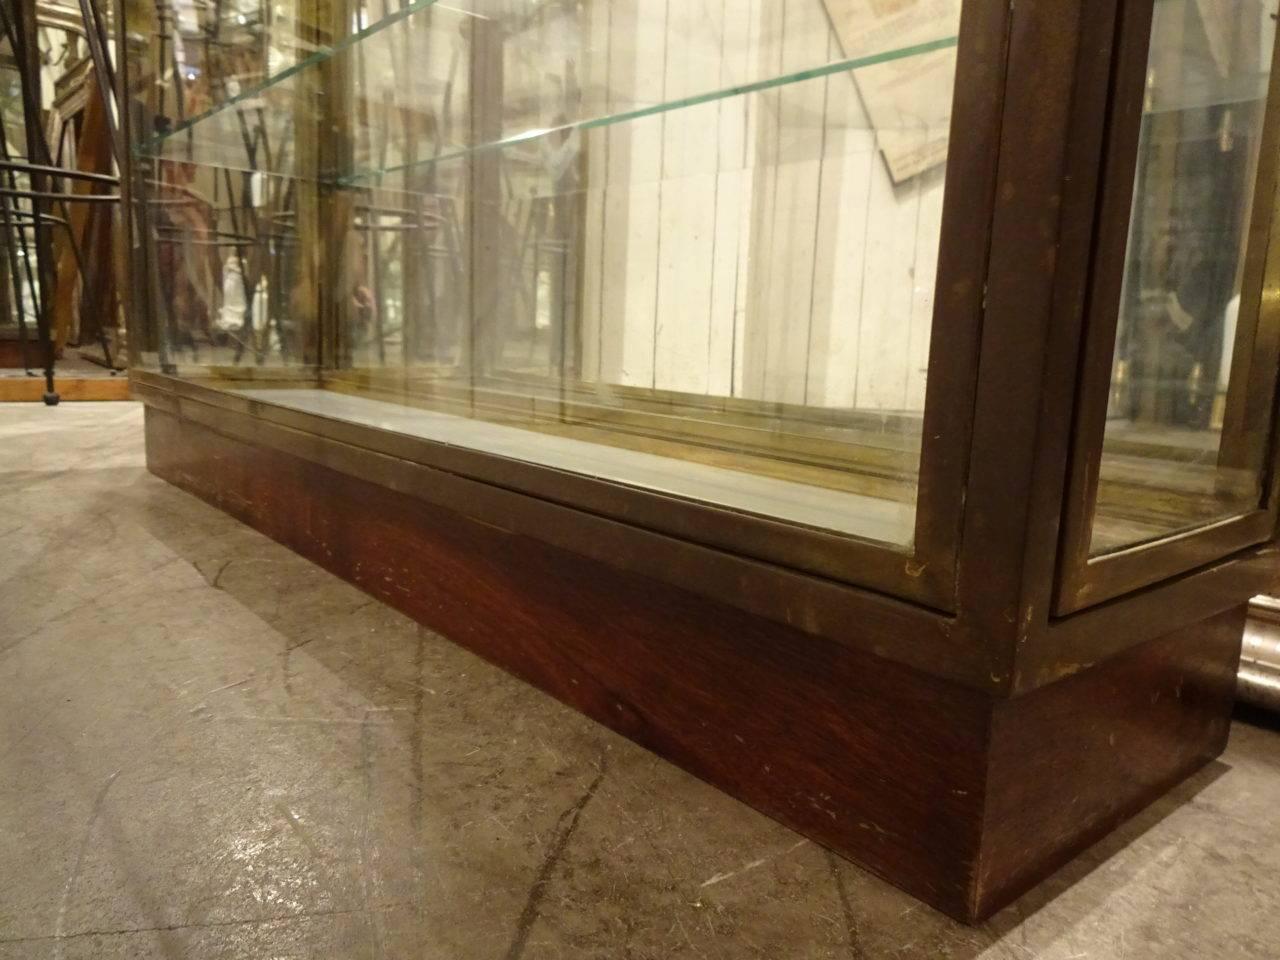 Elegant and narrow midcentury French brass display cabinet from the 1950s, originally used in a boutique. Both ends of the display have doors to access the three glass shelves. Slim and elegantly raised from the floor with a wooden base. Super